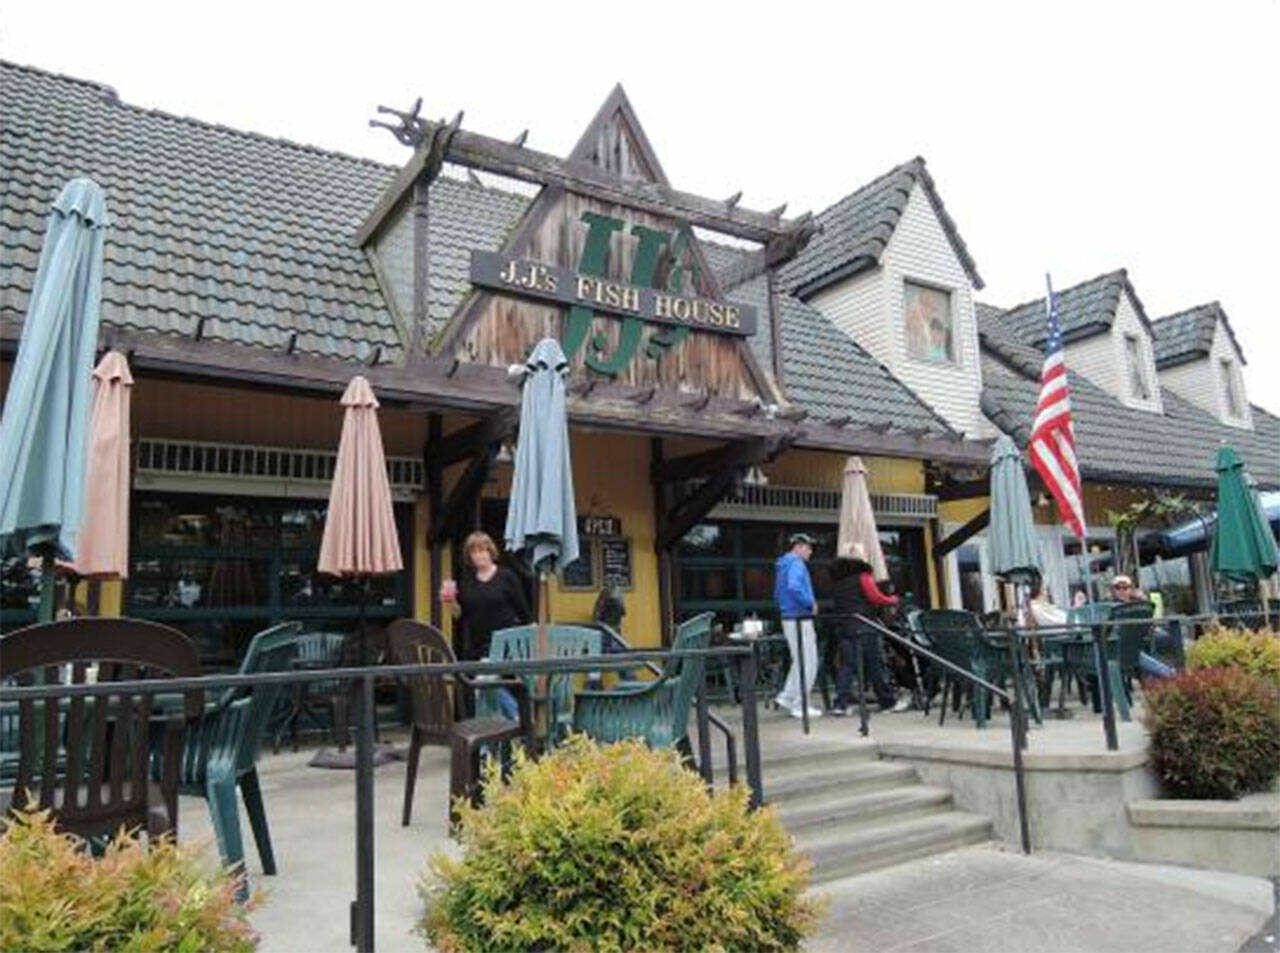 JJ’s Fish House in downtown Poulsbo recently closed after 26 years. Courtesy Photos